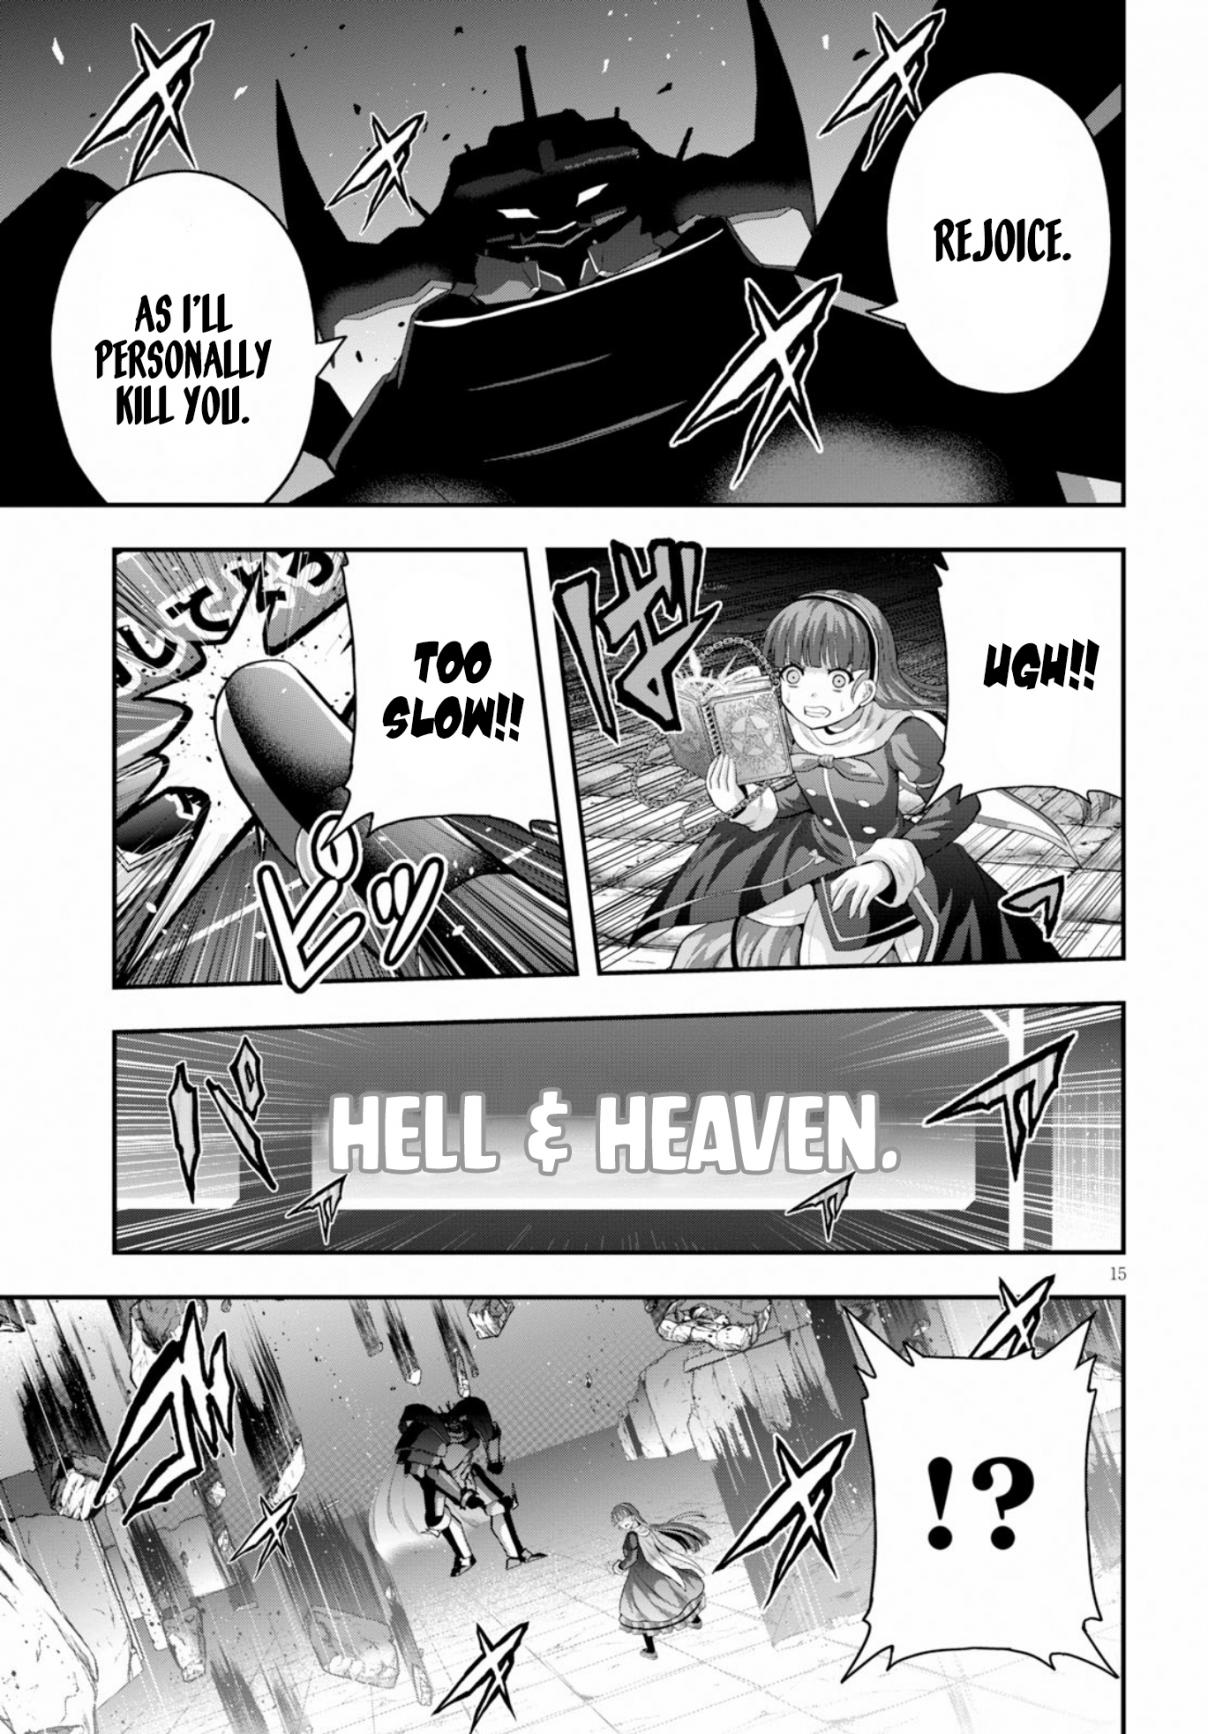 Ecstas Online Ch. 15 Hell and Heaven 02